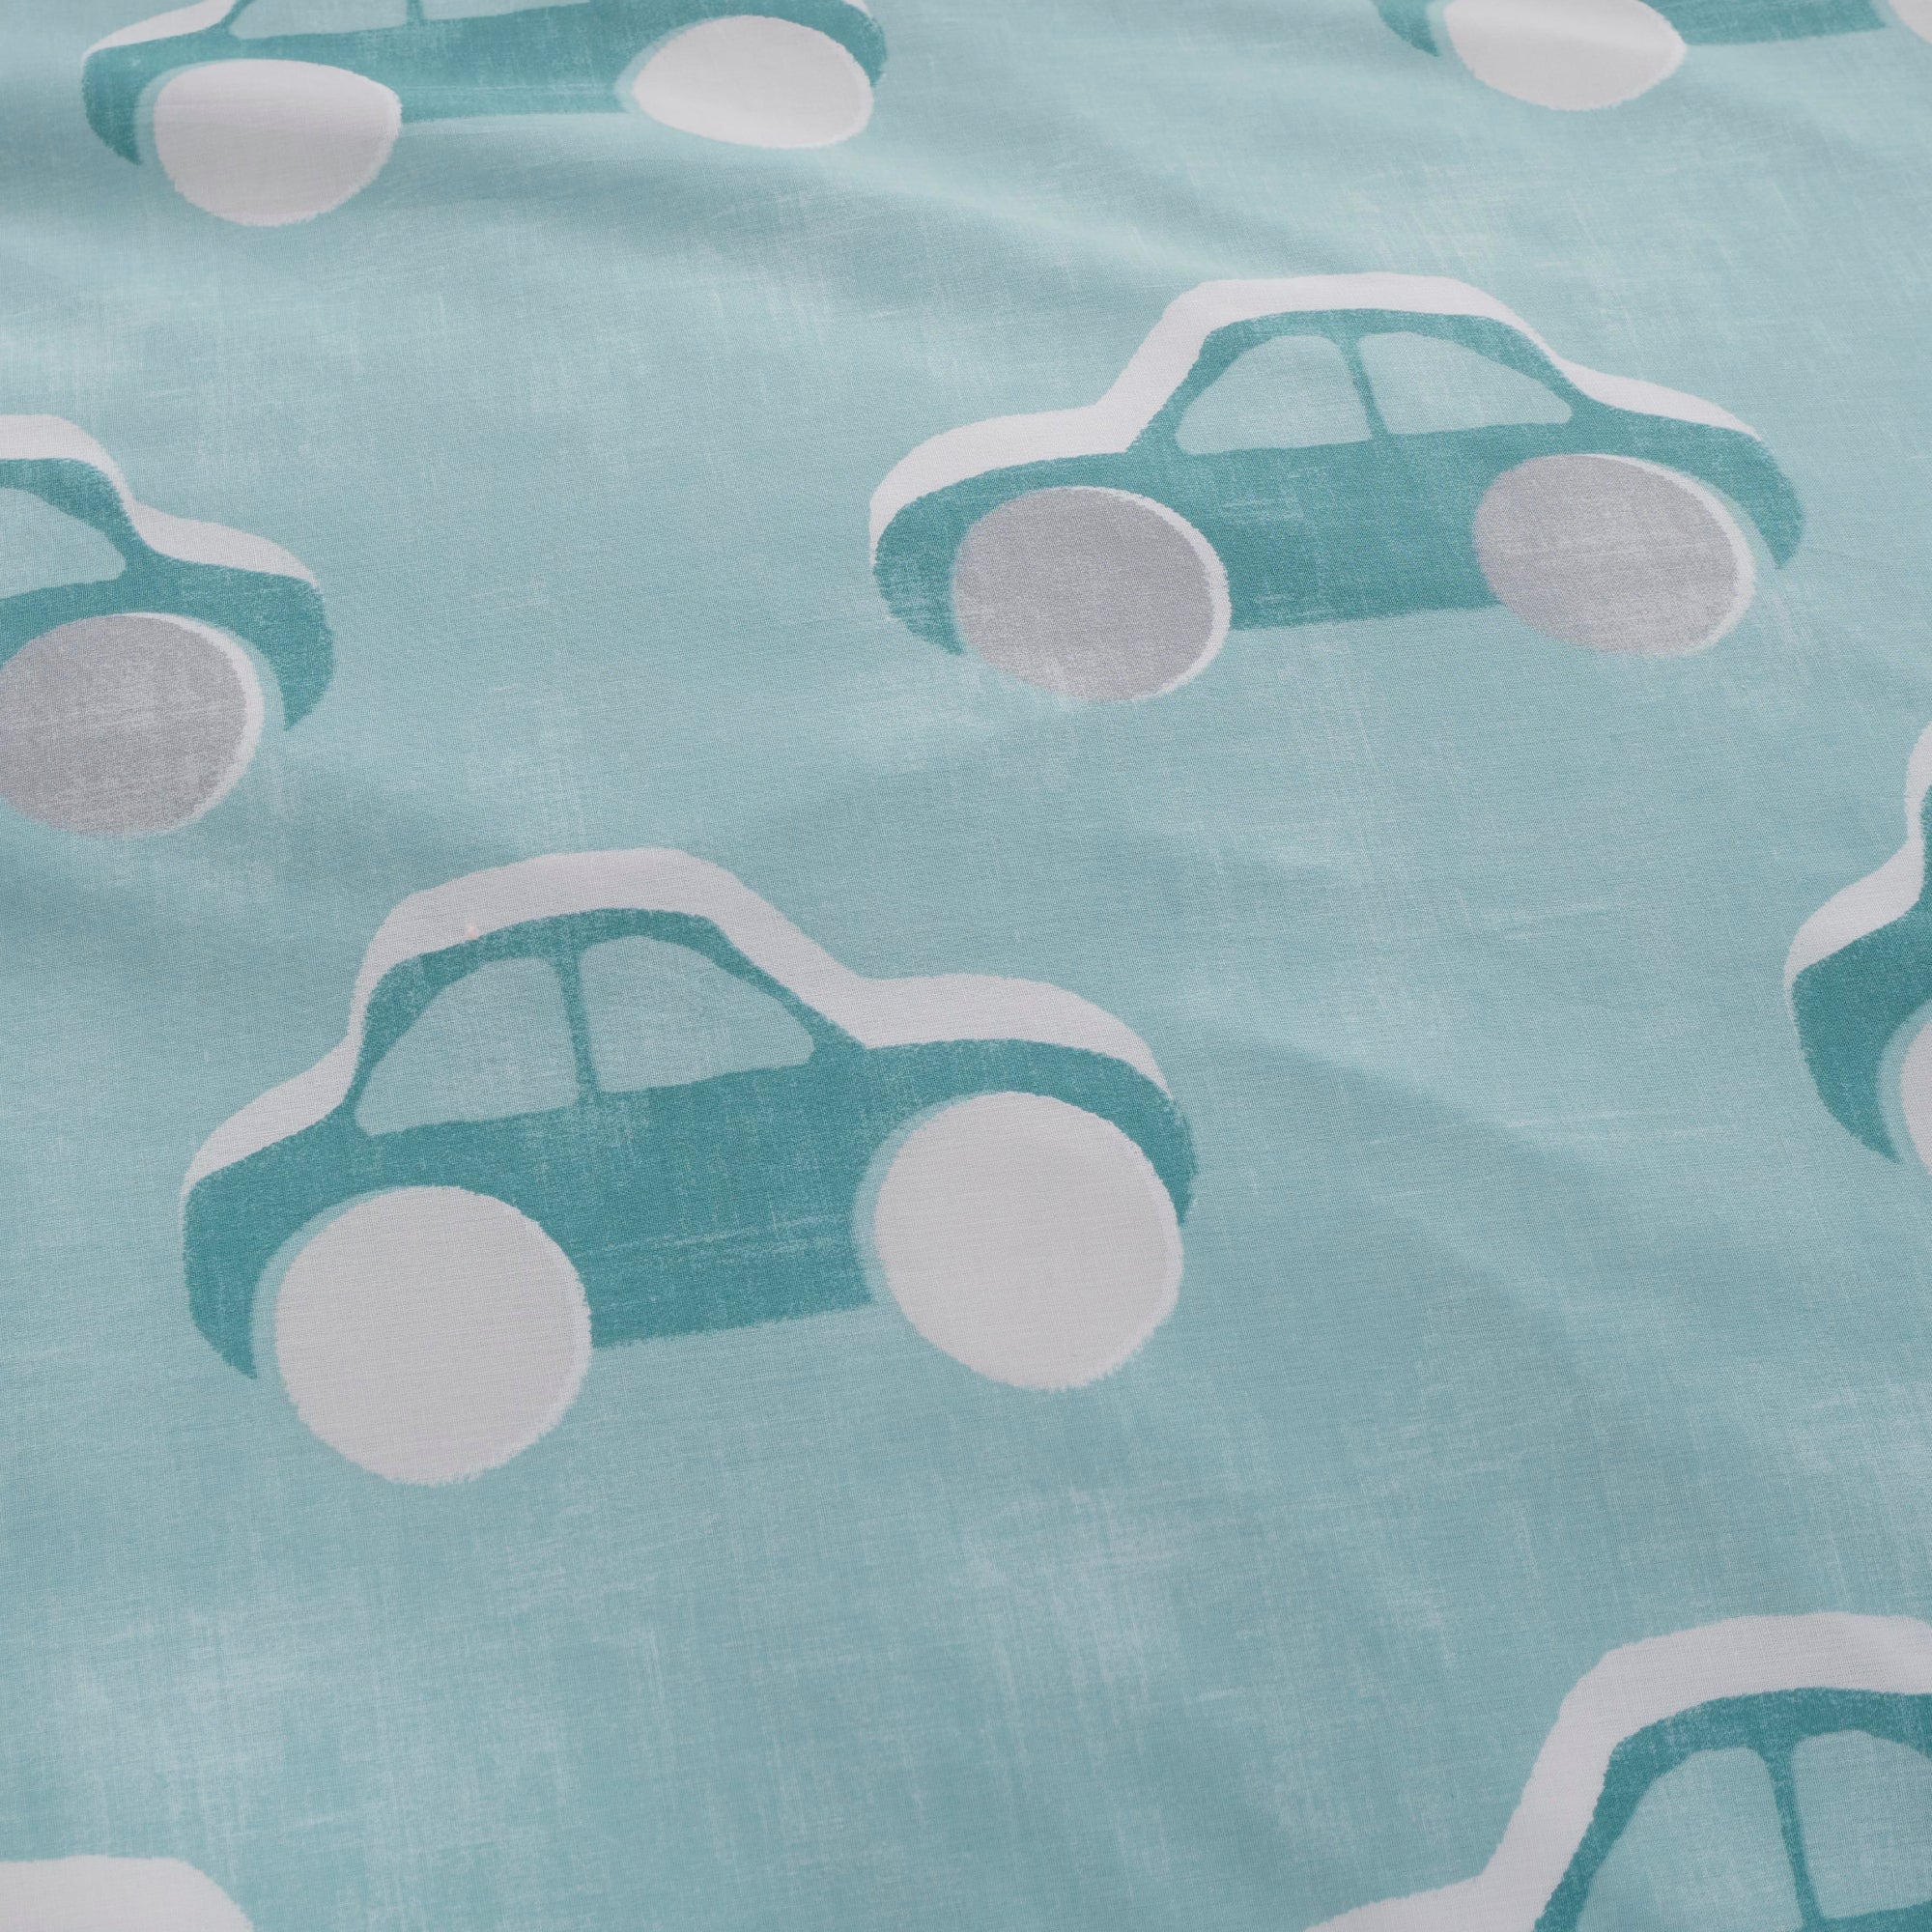 Duvet Cover Set Cool Cars by Bedlam in Duck Egg